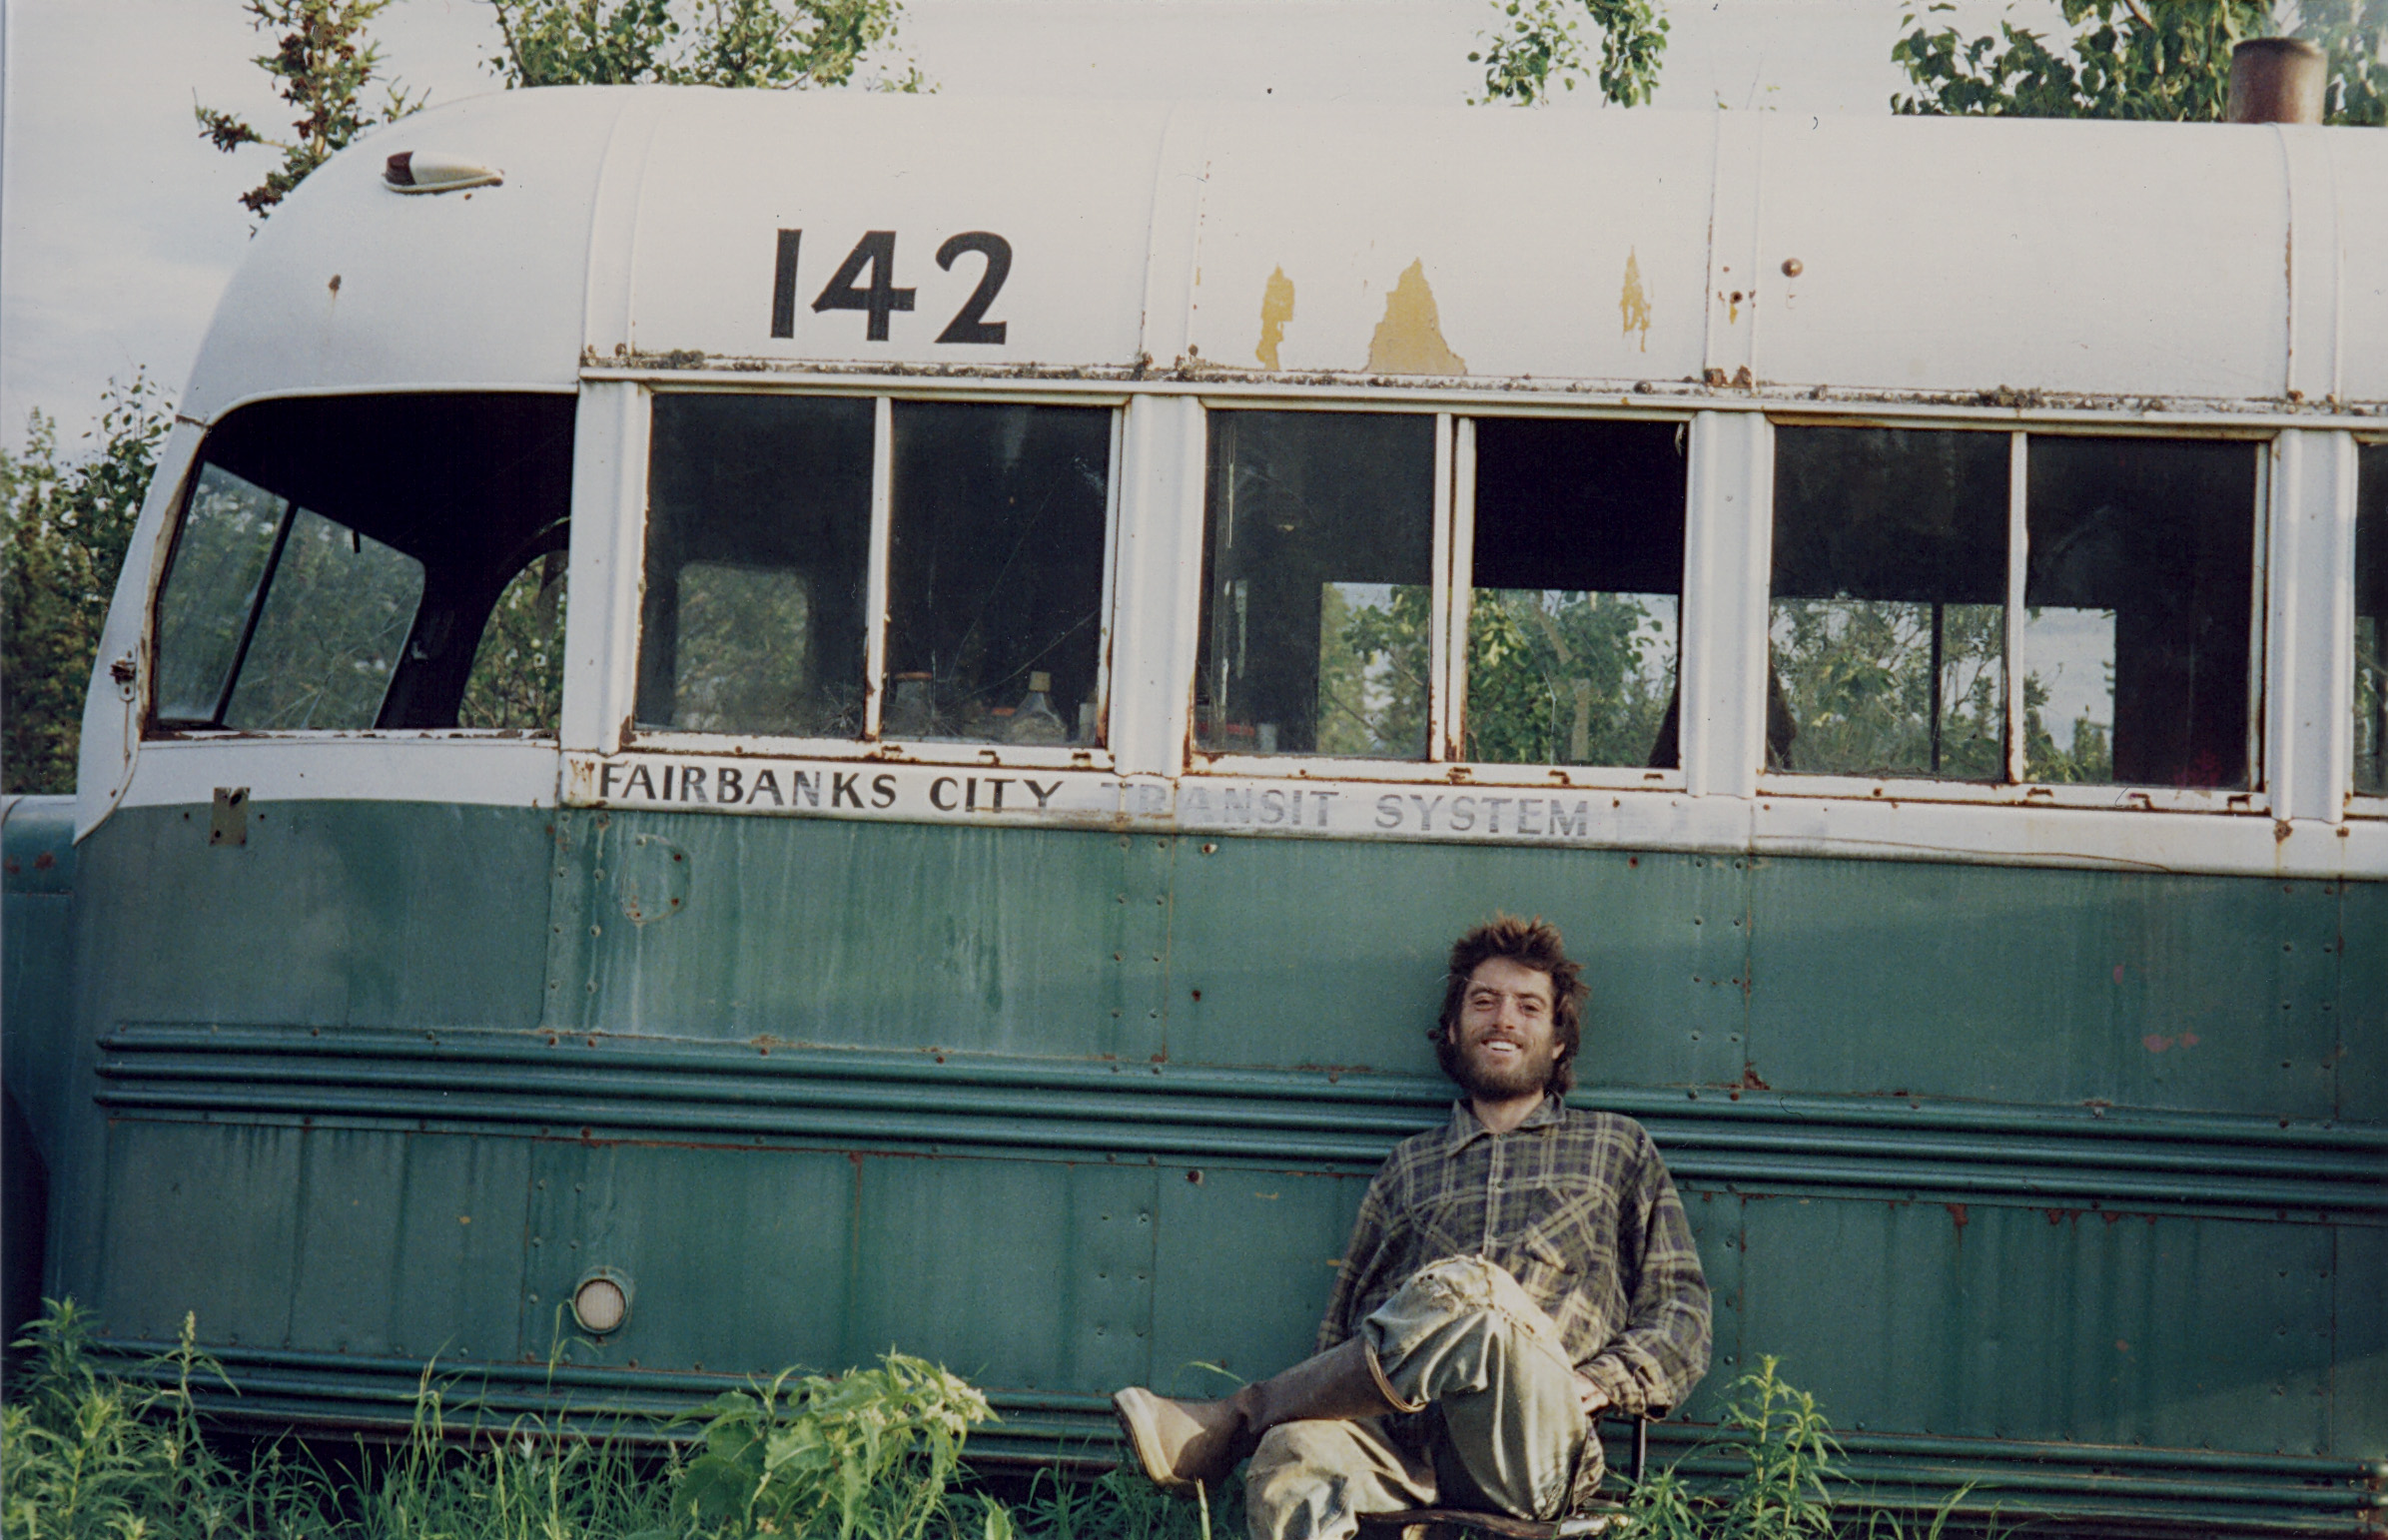 Christopher McCandless at Bus 142 in 1992